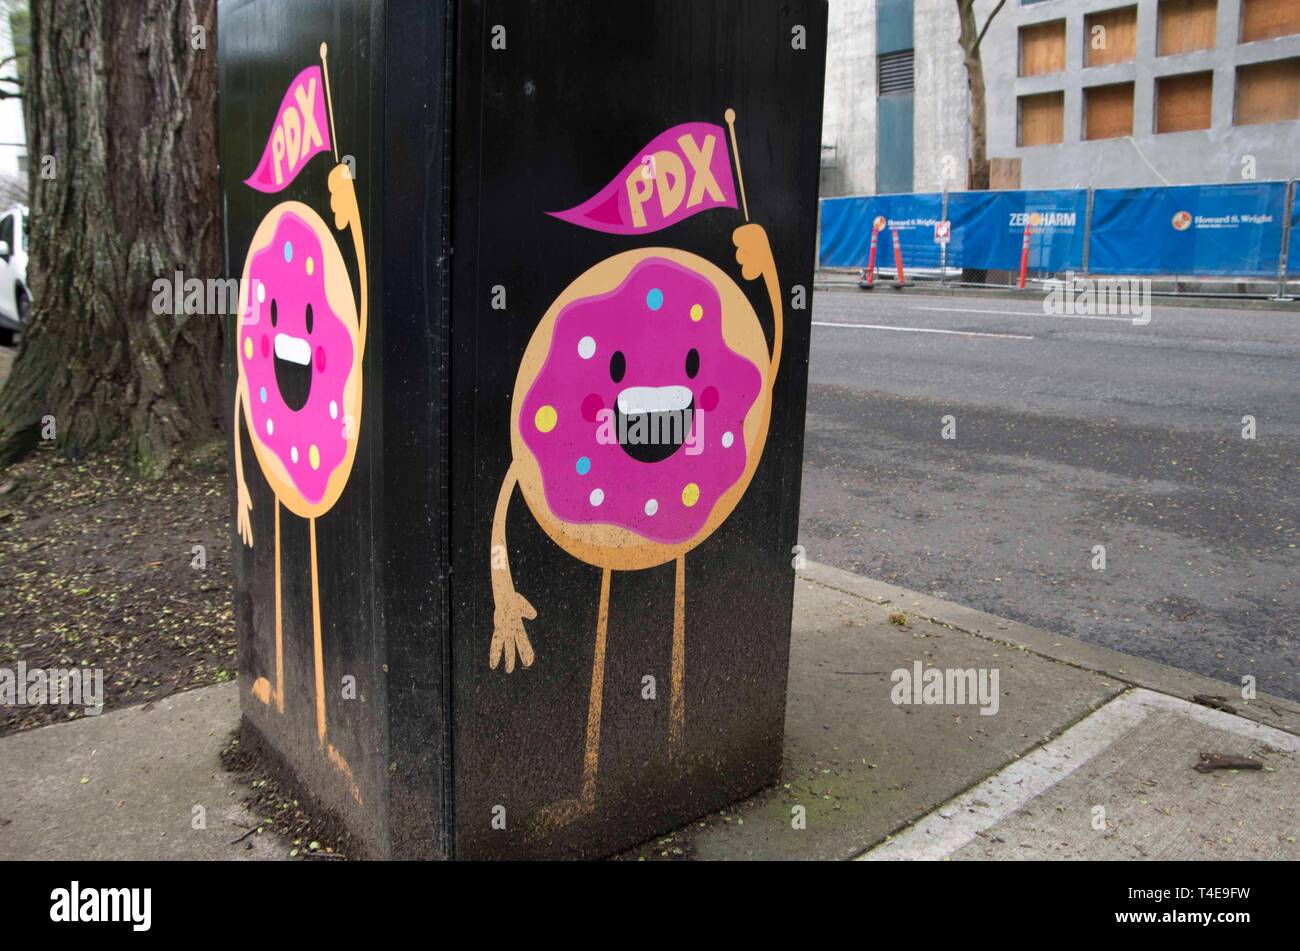 A pair of smiling cartoon doughnuts can be seen from a sidewalk in downtown Portland, OR. Stock Photo